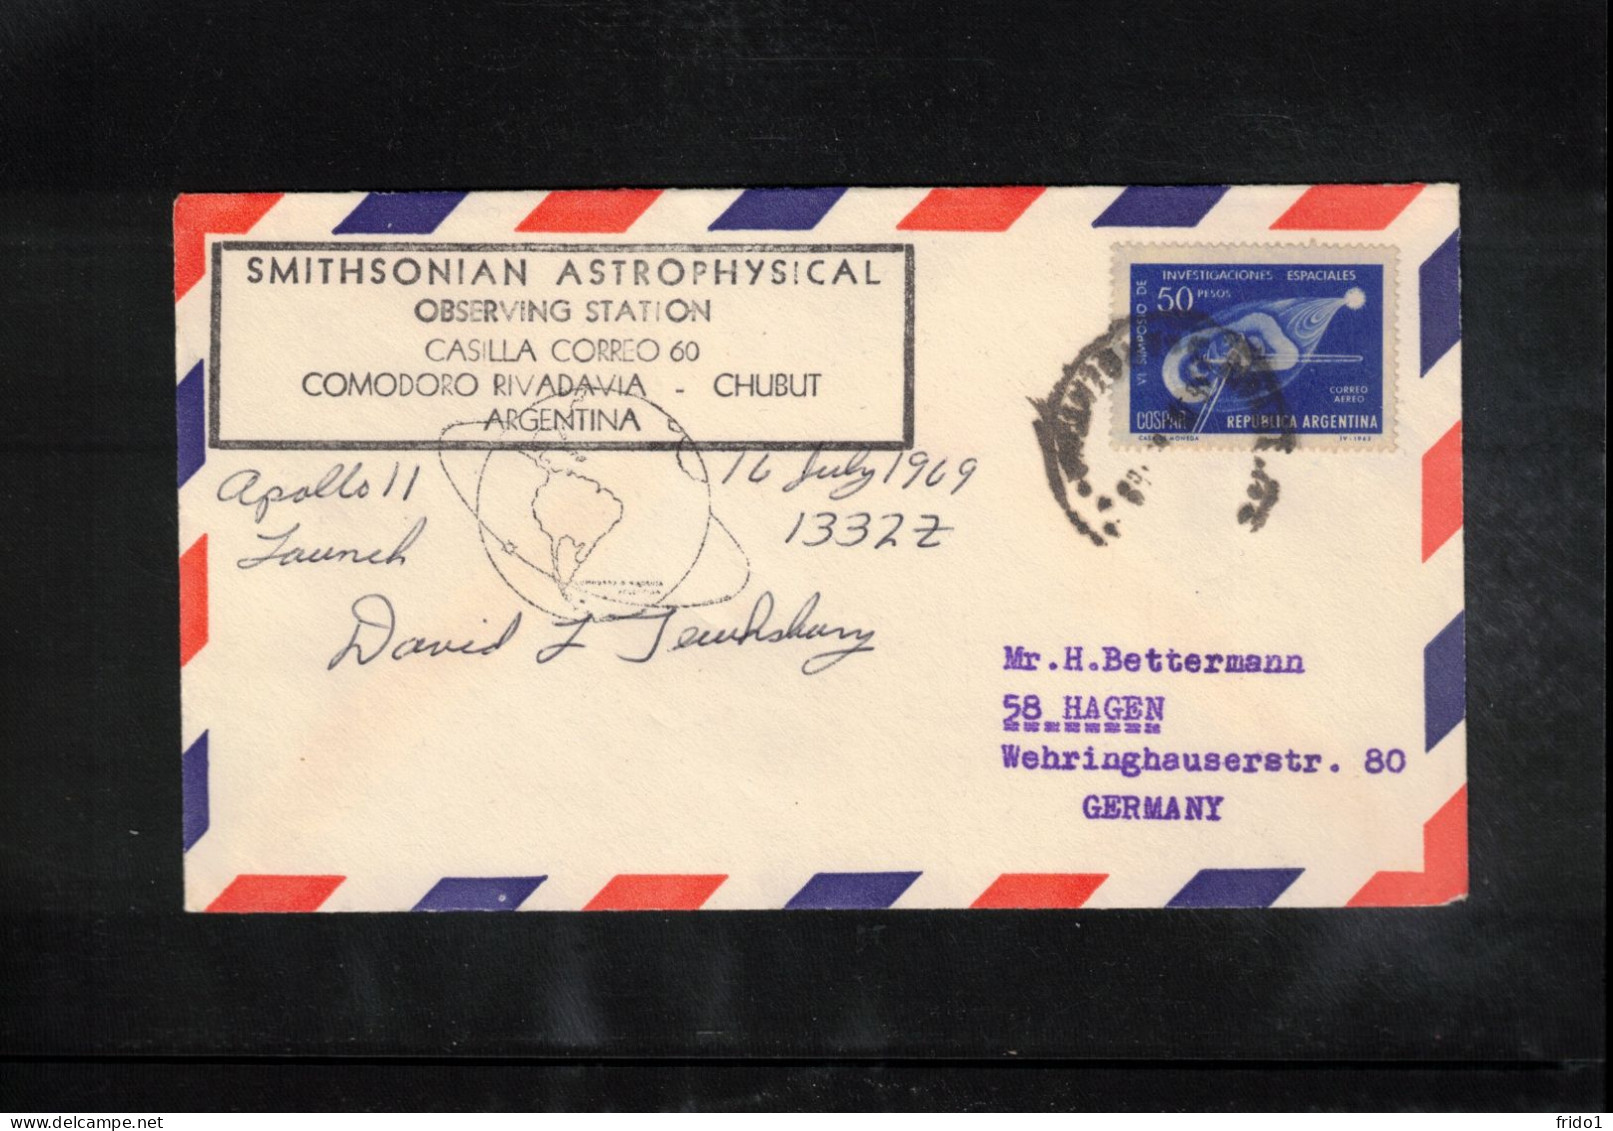 USA 1969 Space / Weltraum - Apollo XI - Smithsonian Astrophysical Observation Station Argentina Interesting Cover - Stati Uniti